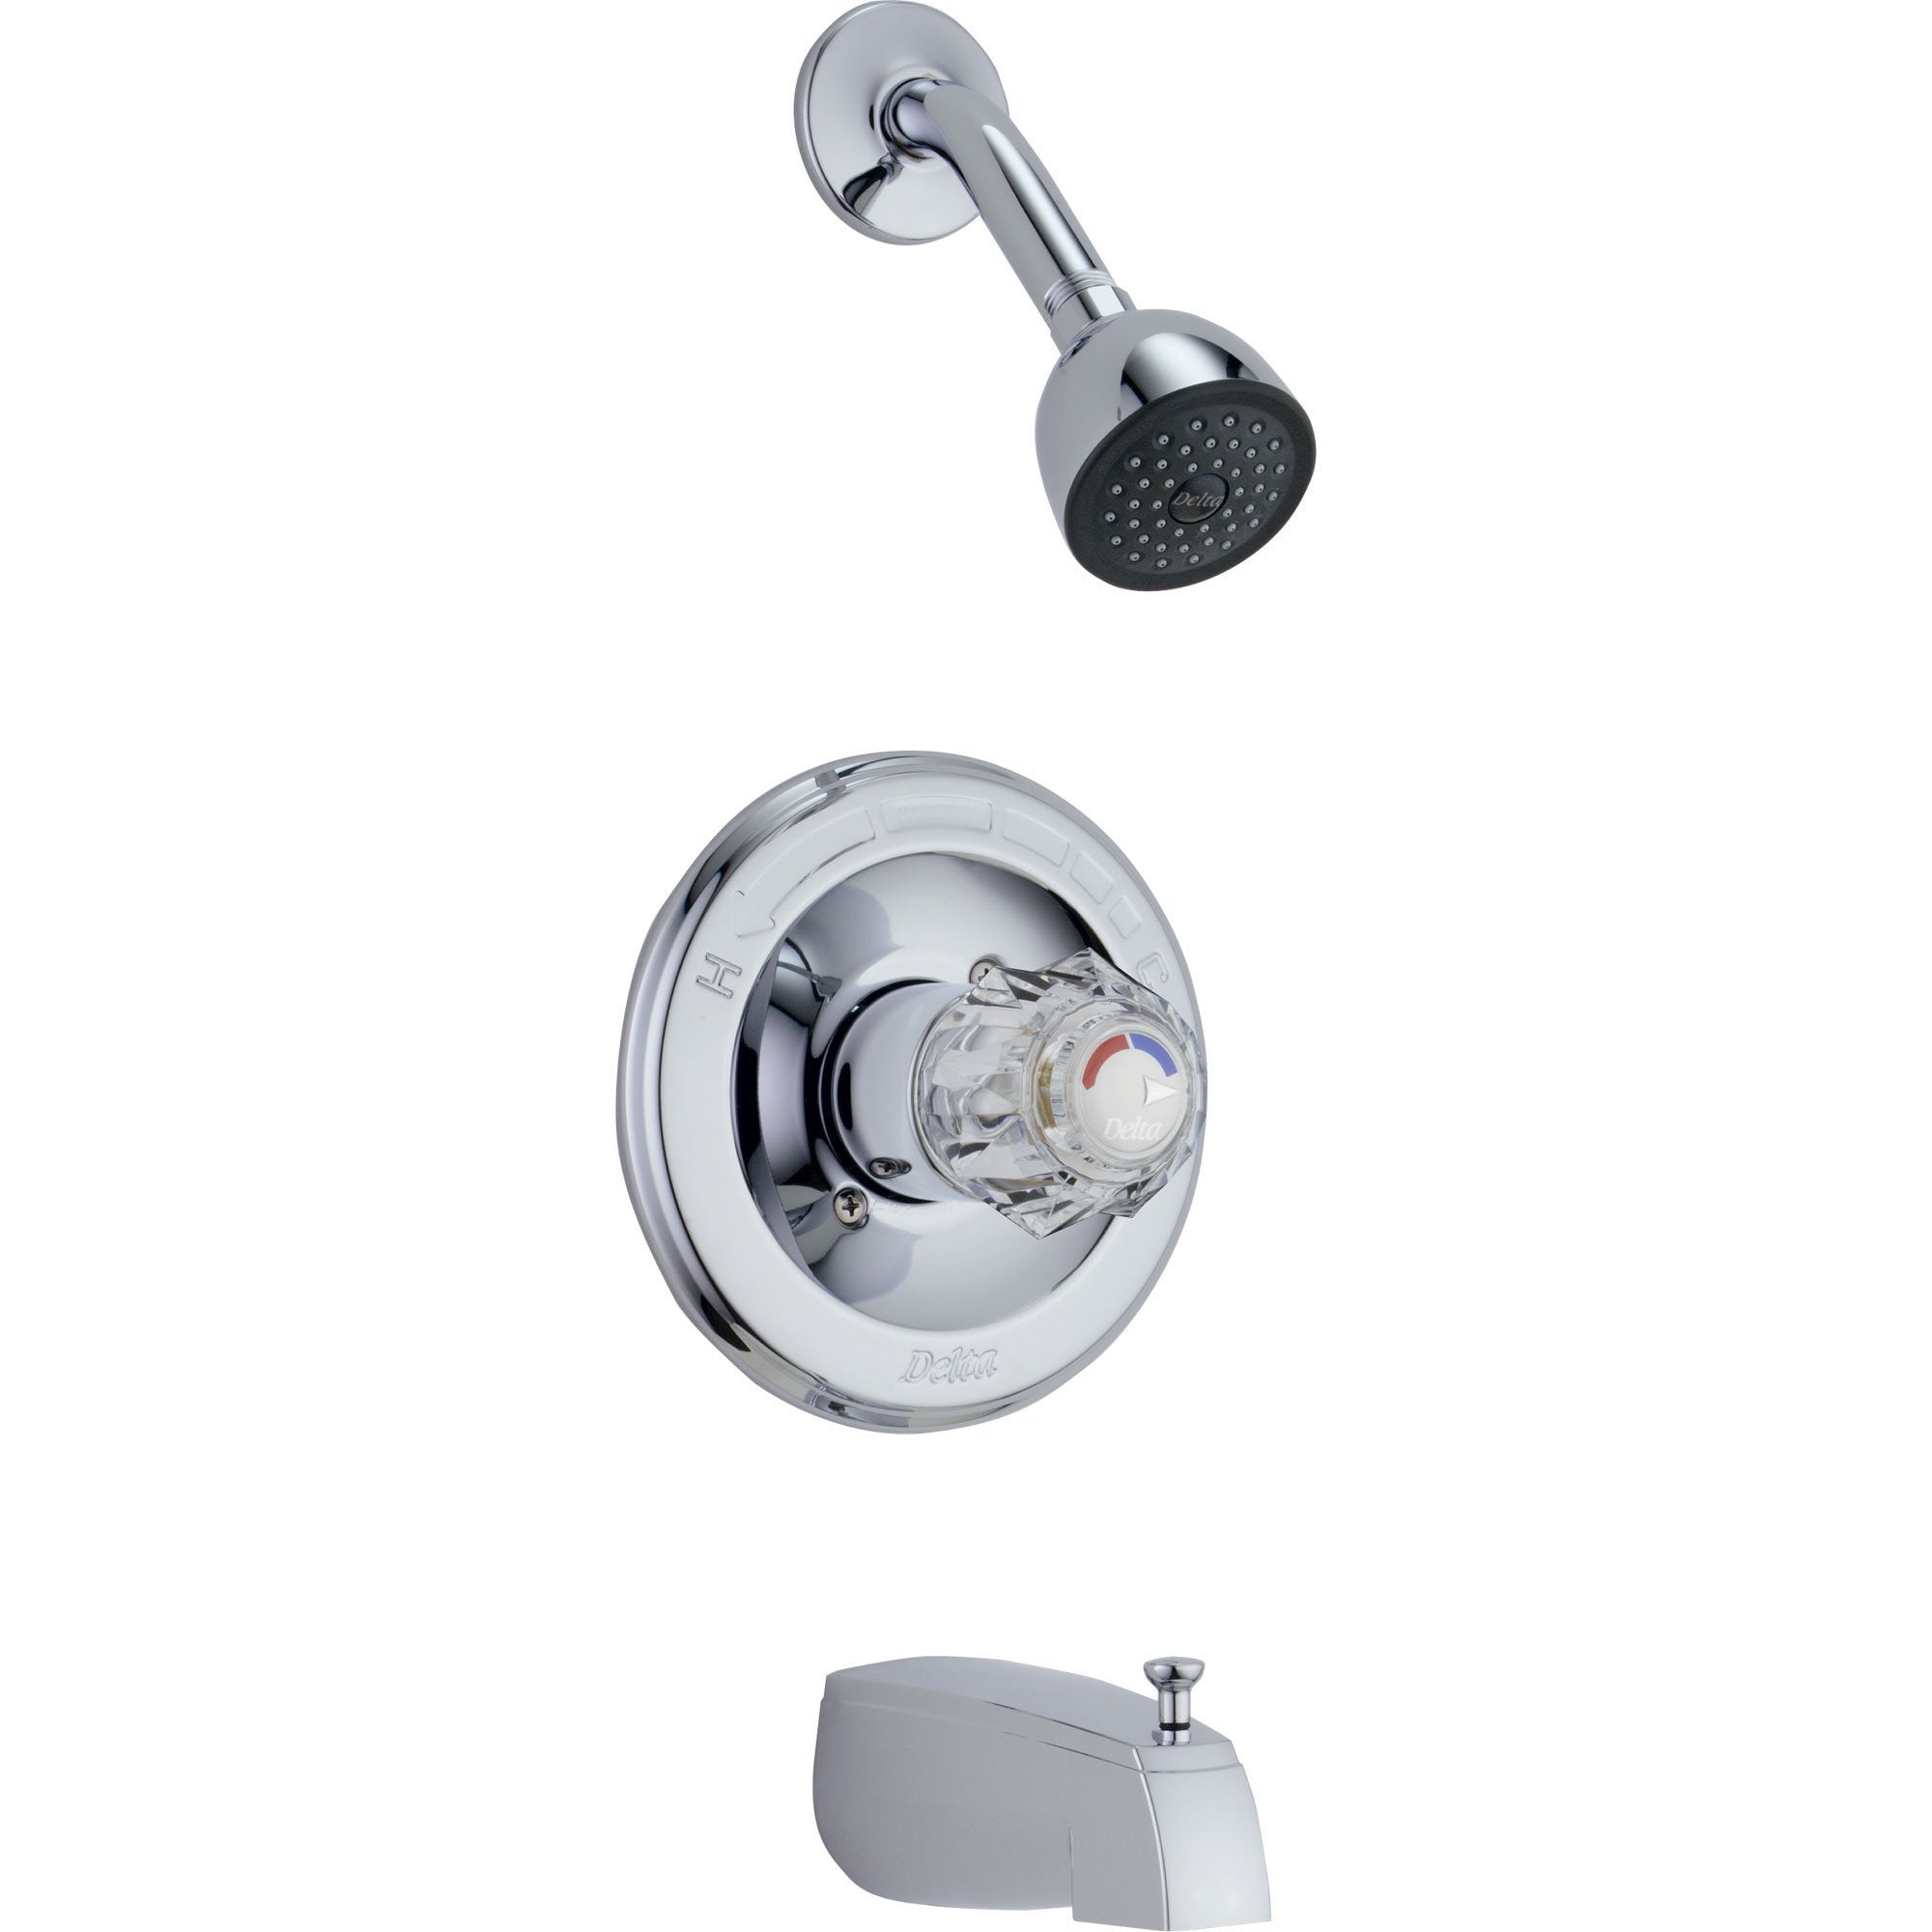 Delta Classic Chrome Single Control Knob Tub and Shower Faucet with Valve D303V